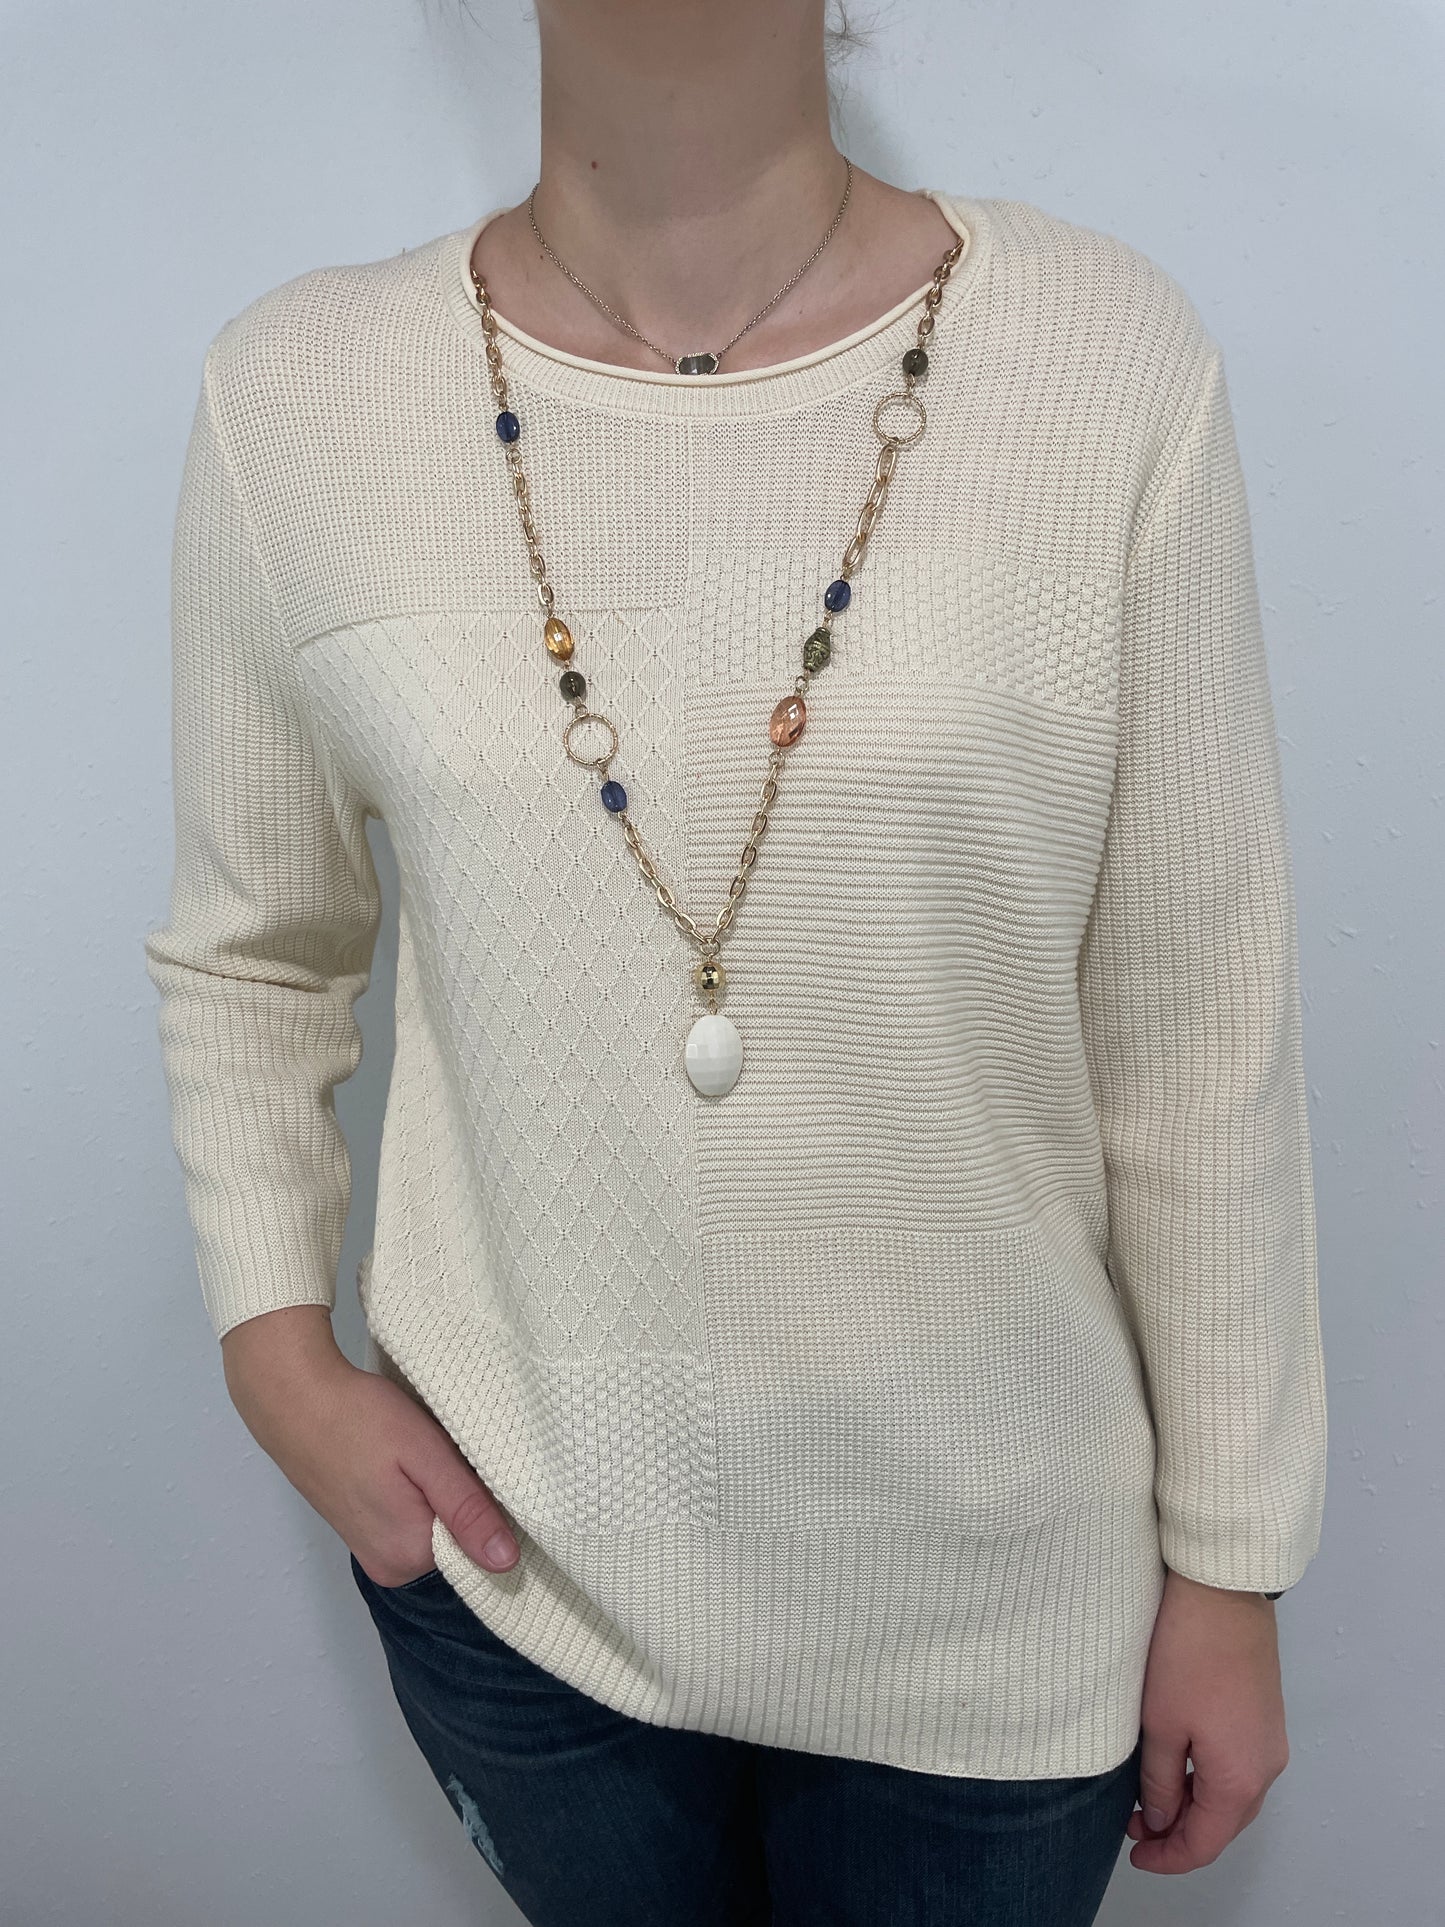 MIX PATTERN SWEATER WITH NECKLACE - IVORY